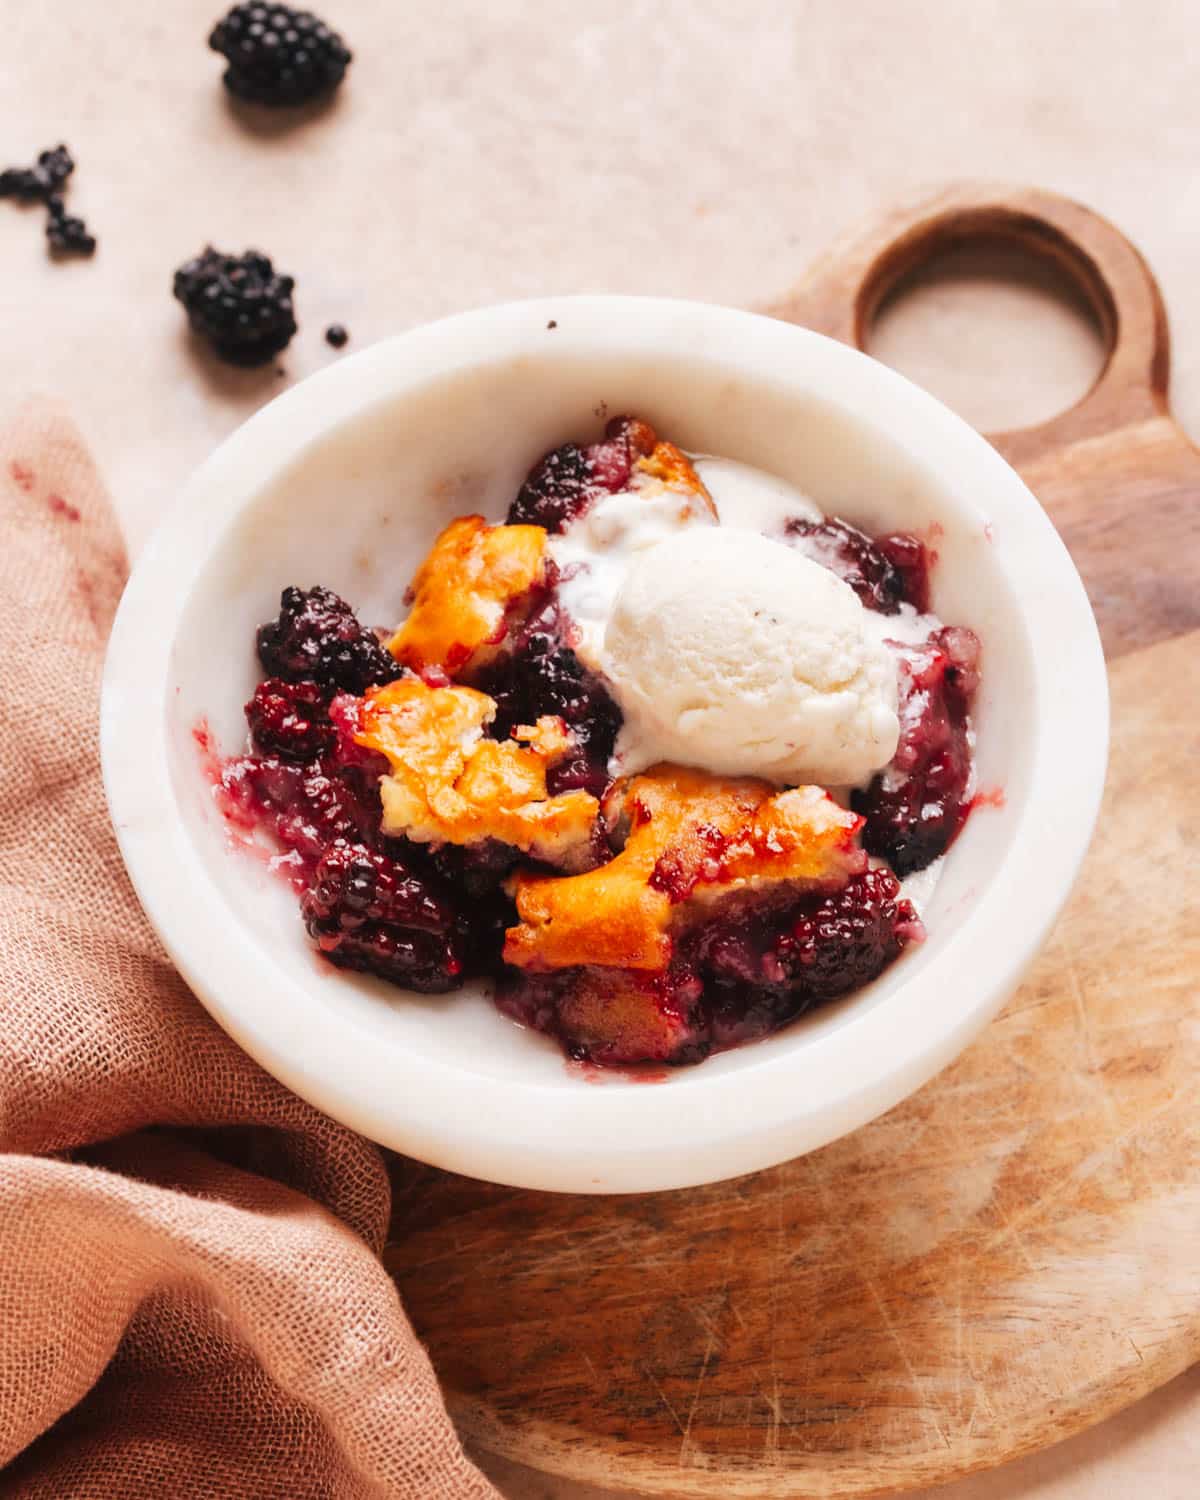 Fresh blackberry cobbler topped with a dollop of vanilla ice cream in a white dish. The dish is set on a wooden cutting board with a kitchen cloth. Fresh blackberries are displayed in the background.